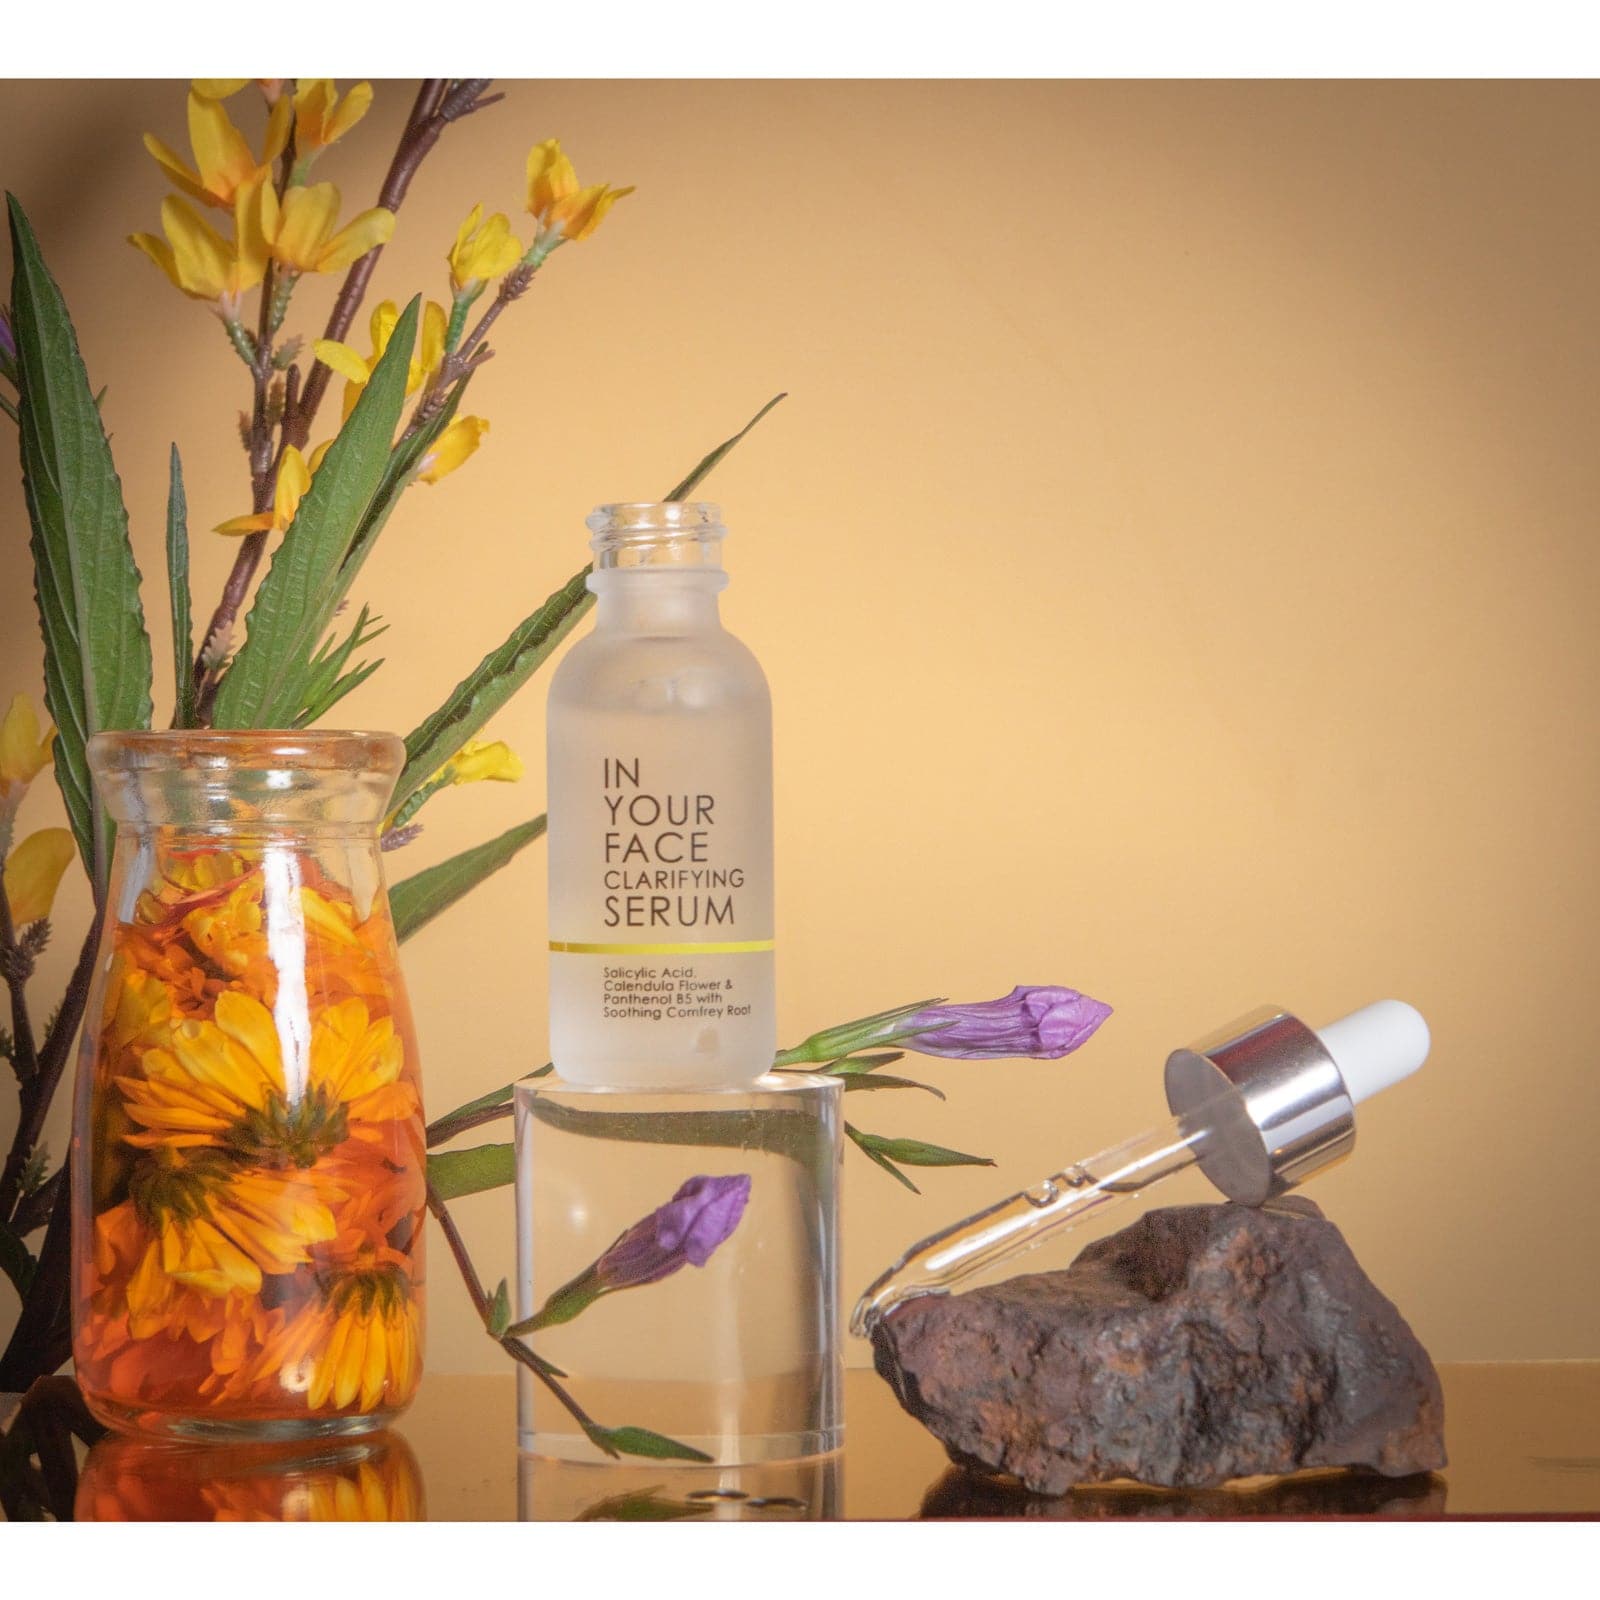 a bottle of the IN YOUR FACE CLARIFYING SERUM on an acrylic cylinder, surrounded by a jar of caledula flowers and various other botanicals. The pipette for the bottle is resting on a rock on the right of the bottle.